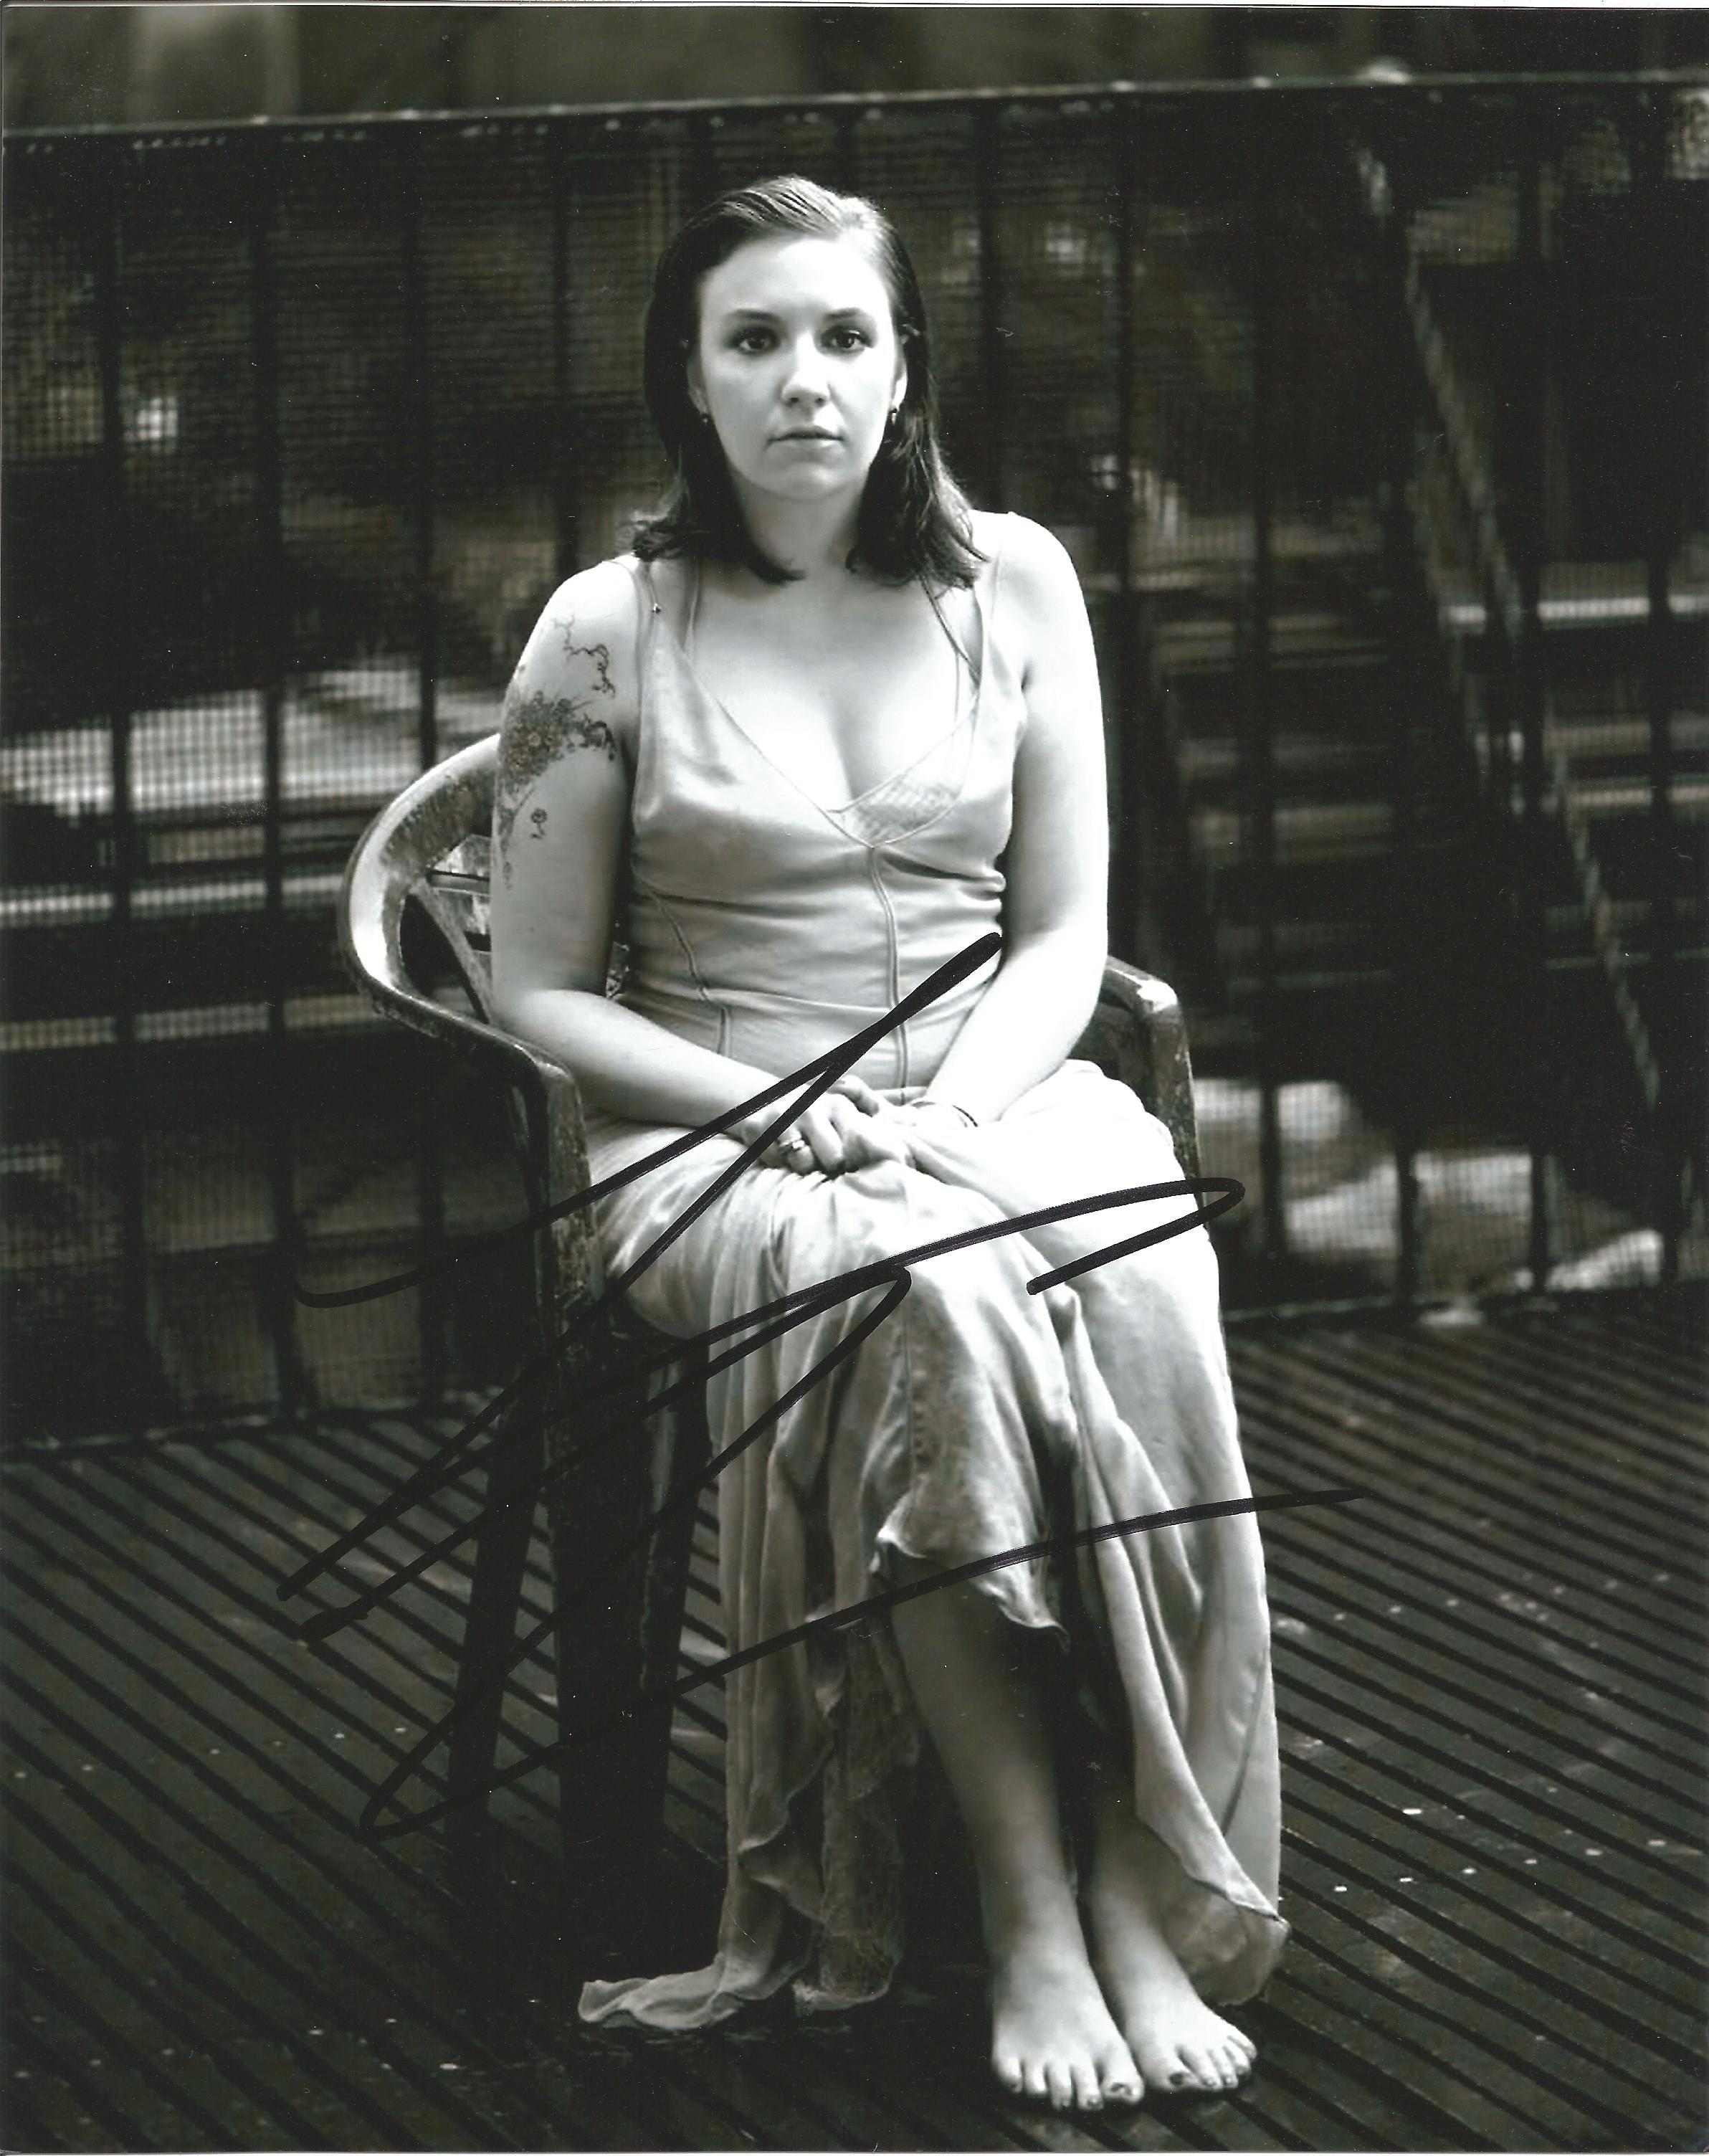 Lena Dunham signed 10x8 black and white photo. Good condition. All autographs come with a